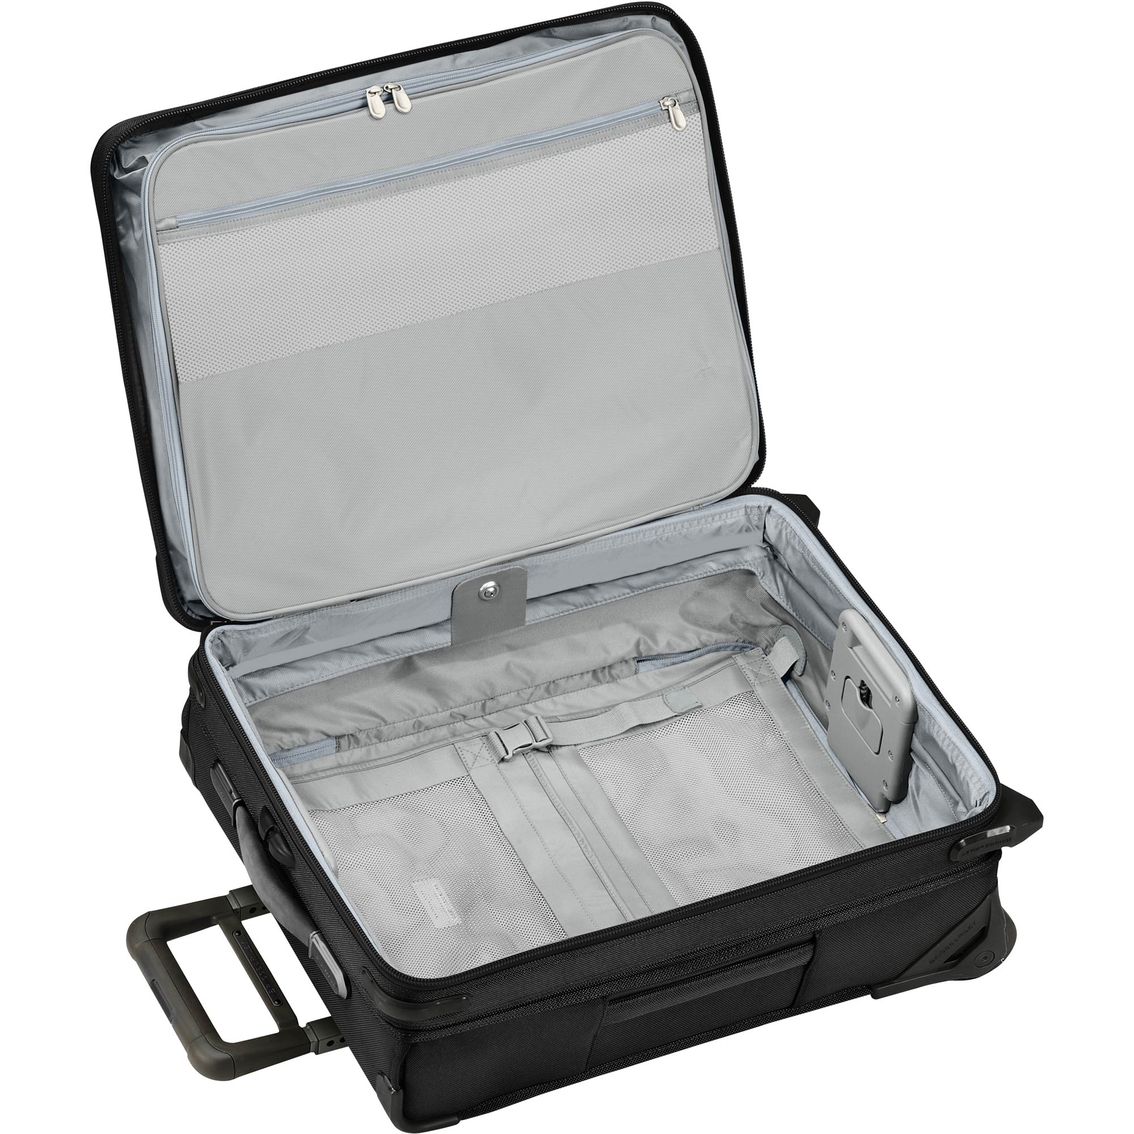 Briggs & Riley Baseline International Carry-On Expandable Wide-Body Upright - Image 2 of 3